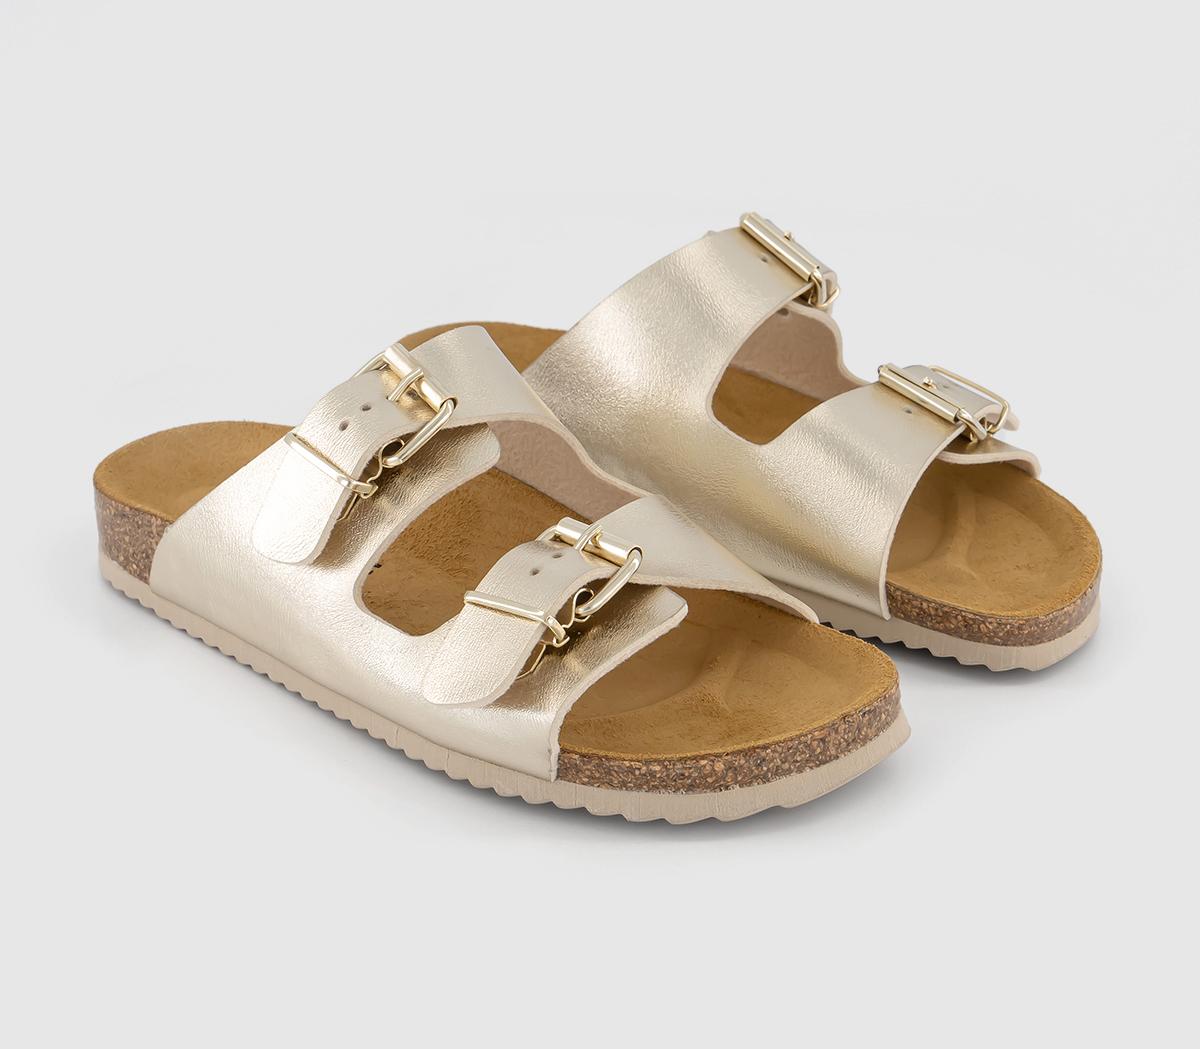 OFFICE Womens Seville Double Buckle Sandals Gold, 7